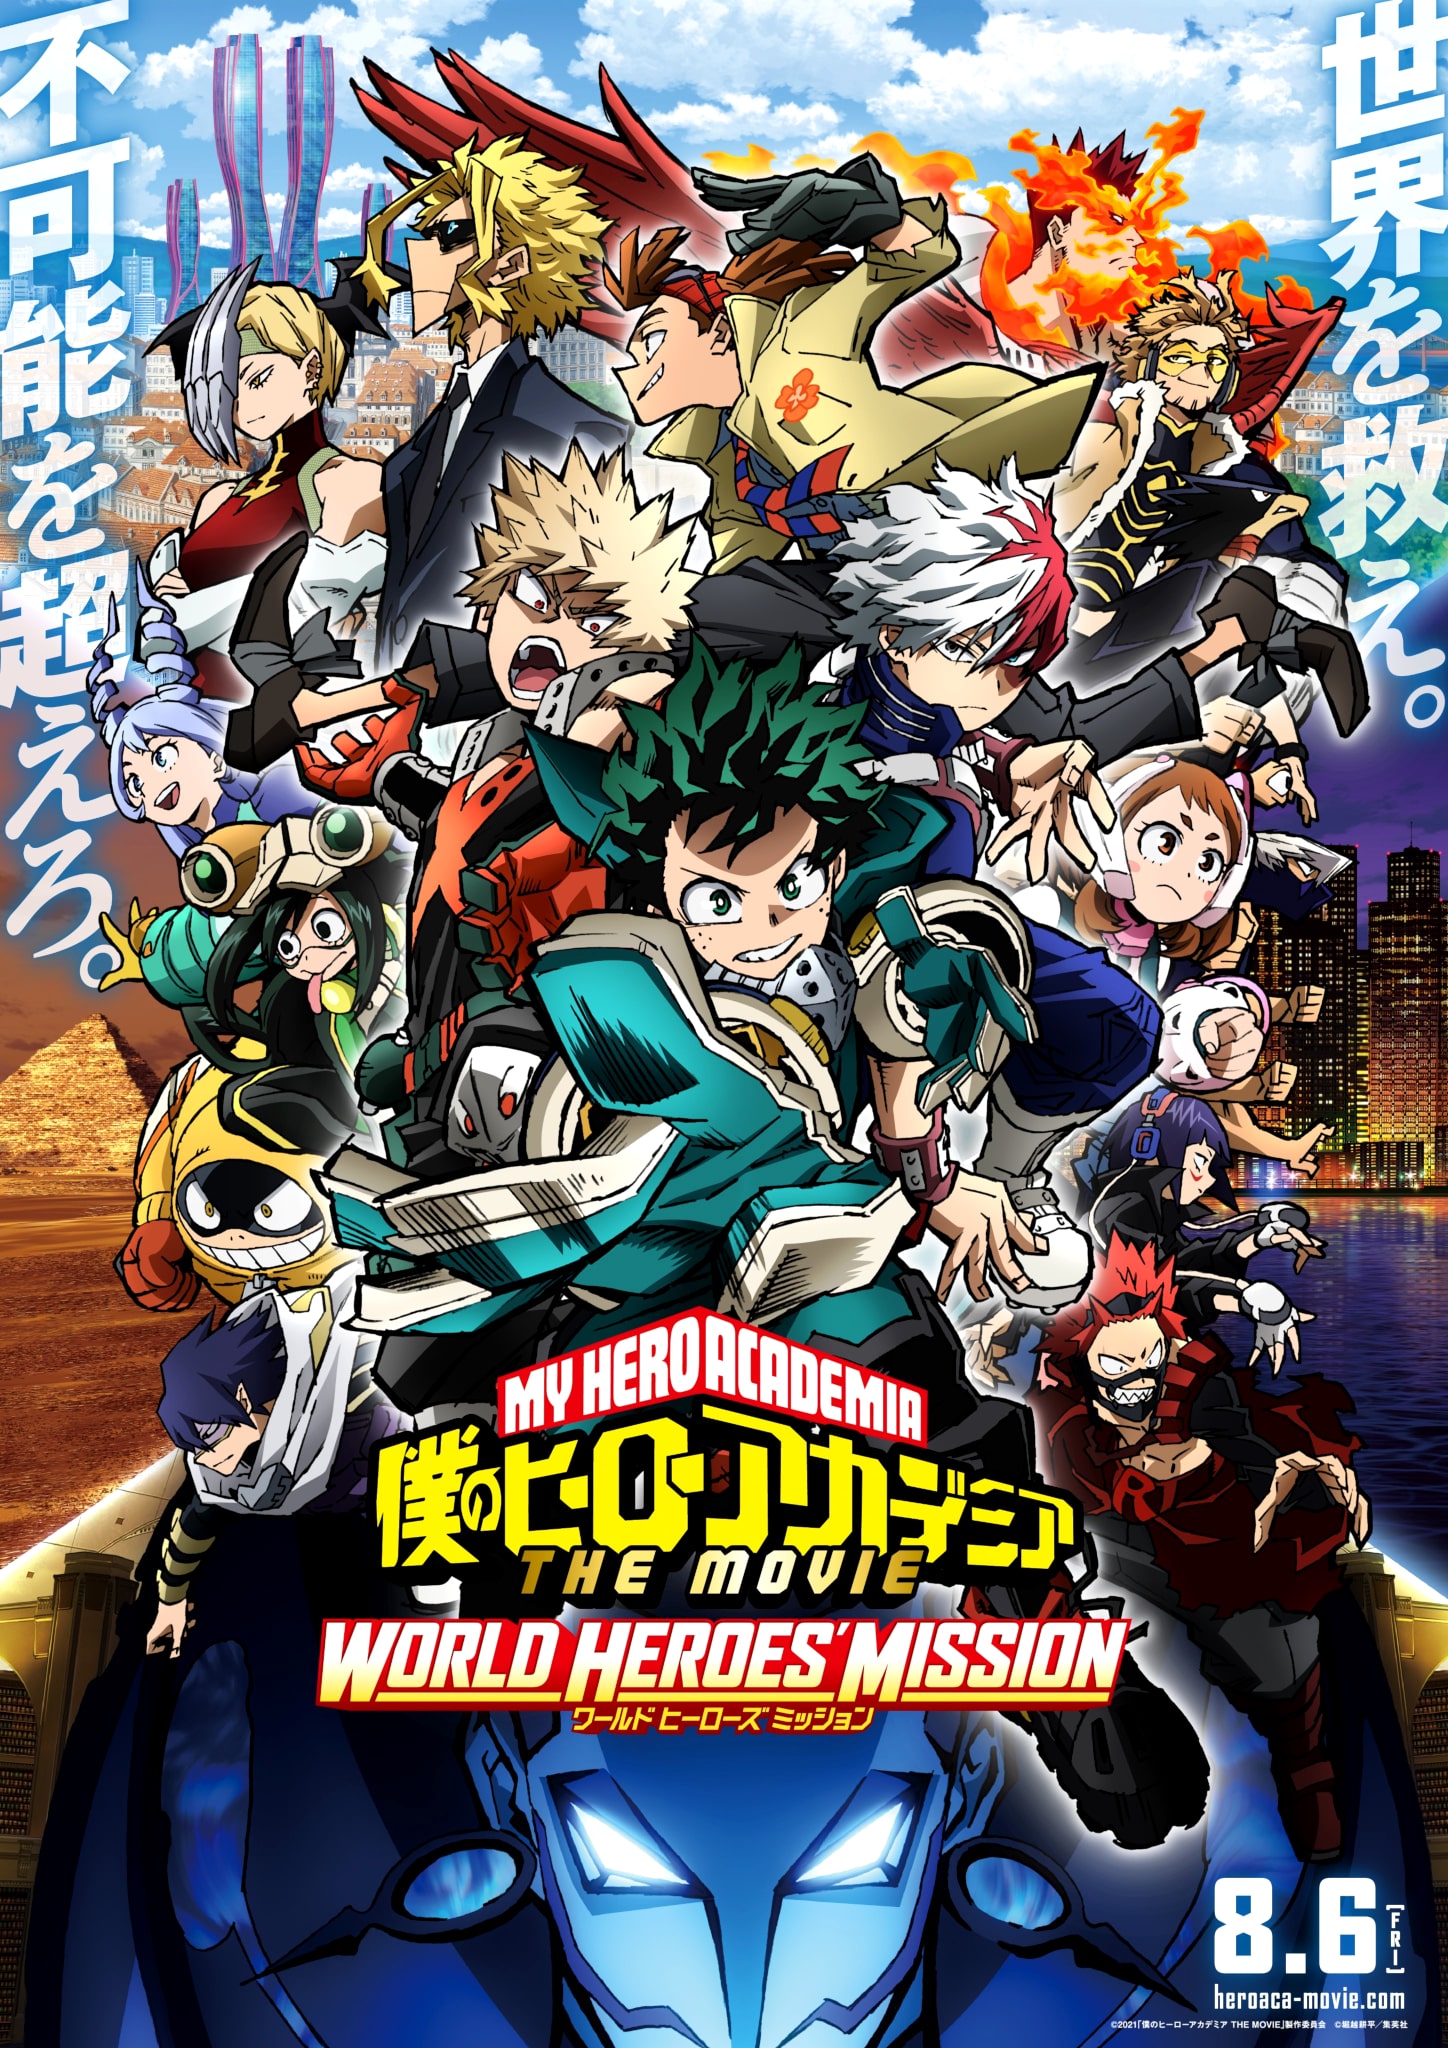 Second visuel pour le film My Hero Academia World Heroes Mission